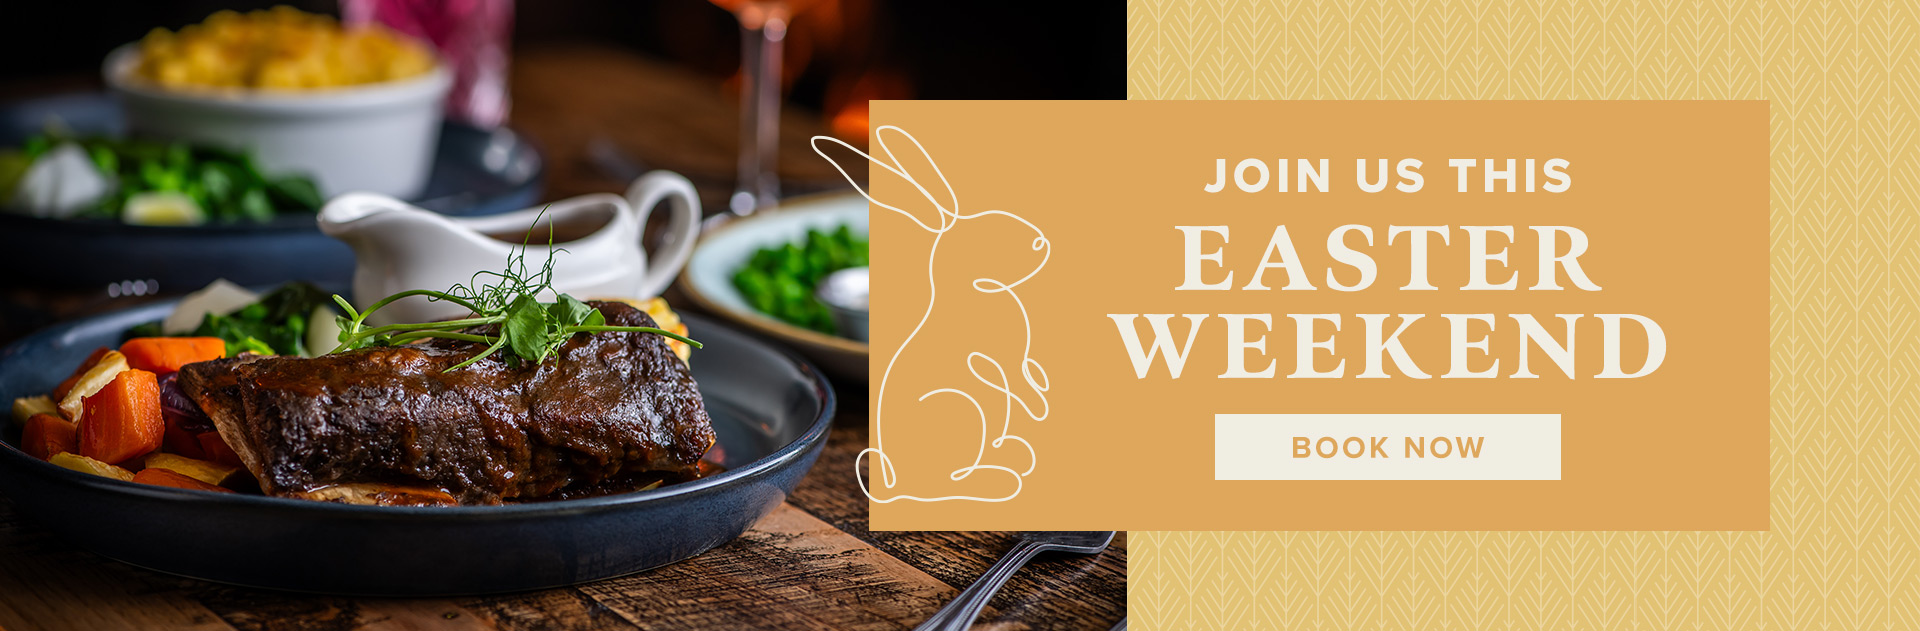 Easter at The Ridgeway Tavern in Enfield